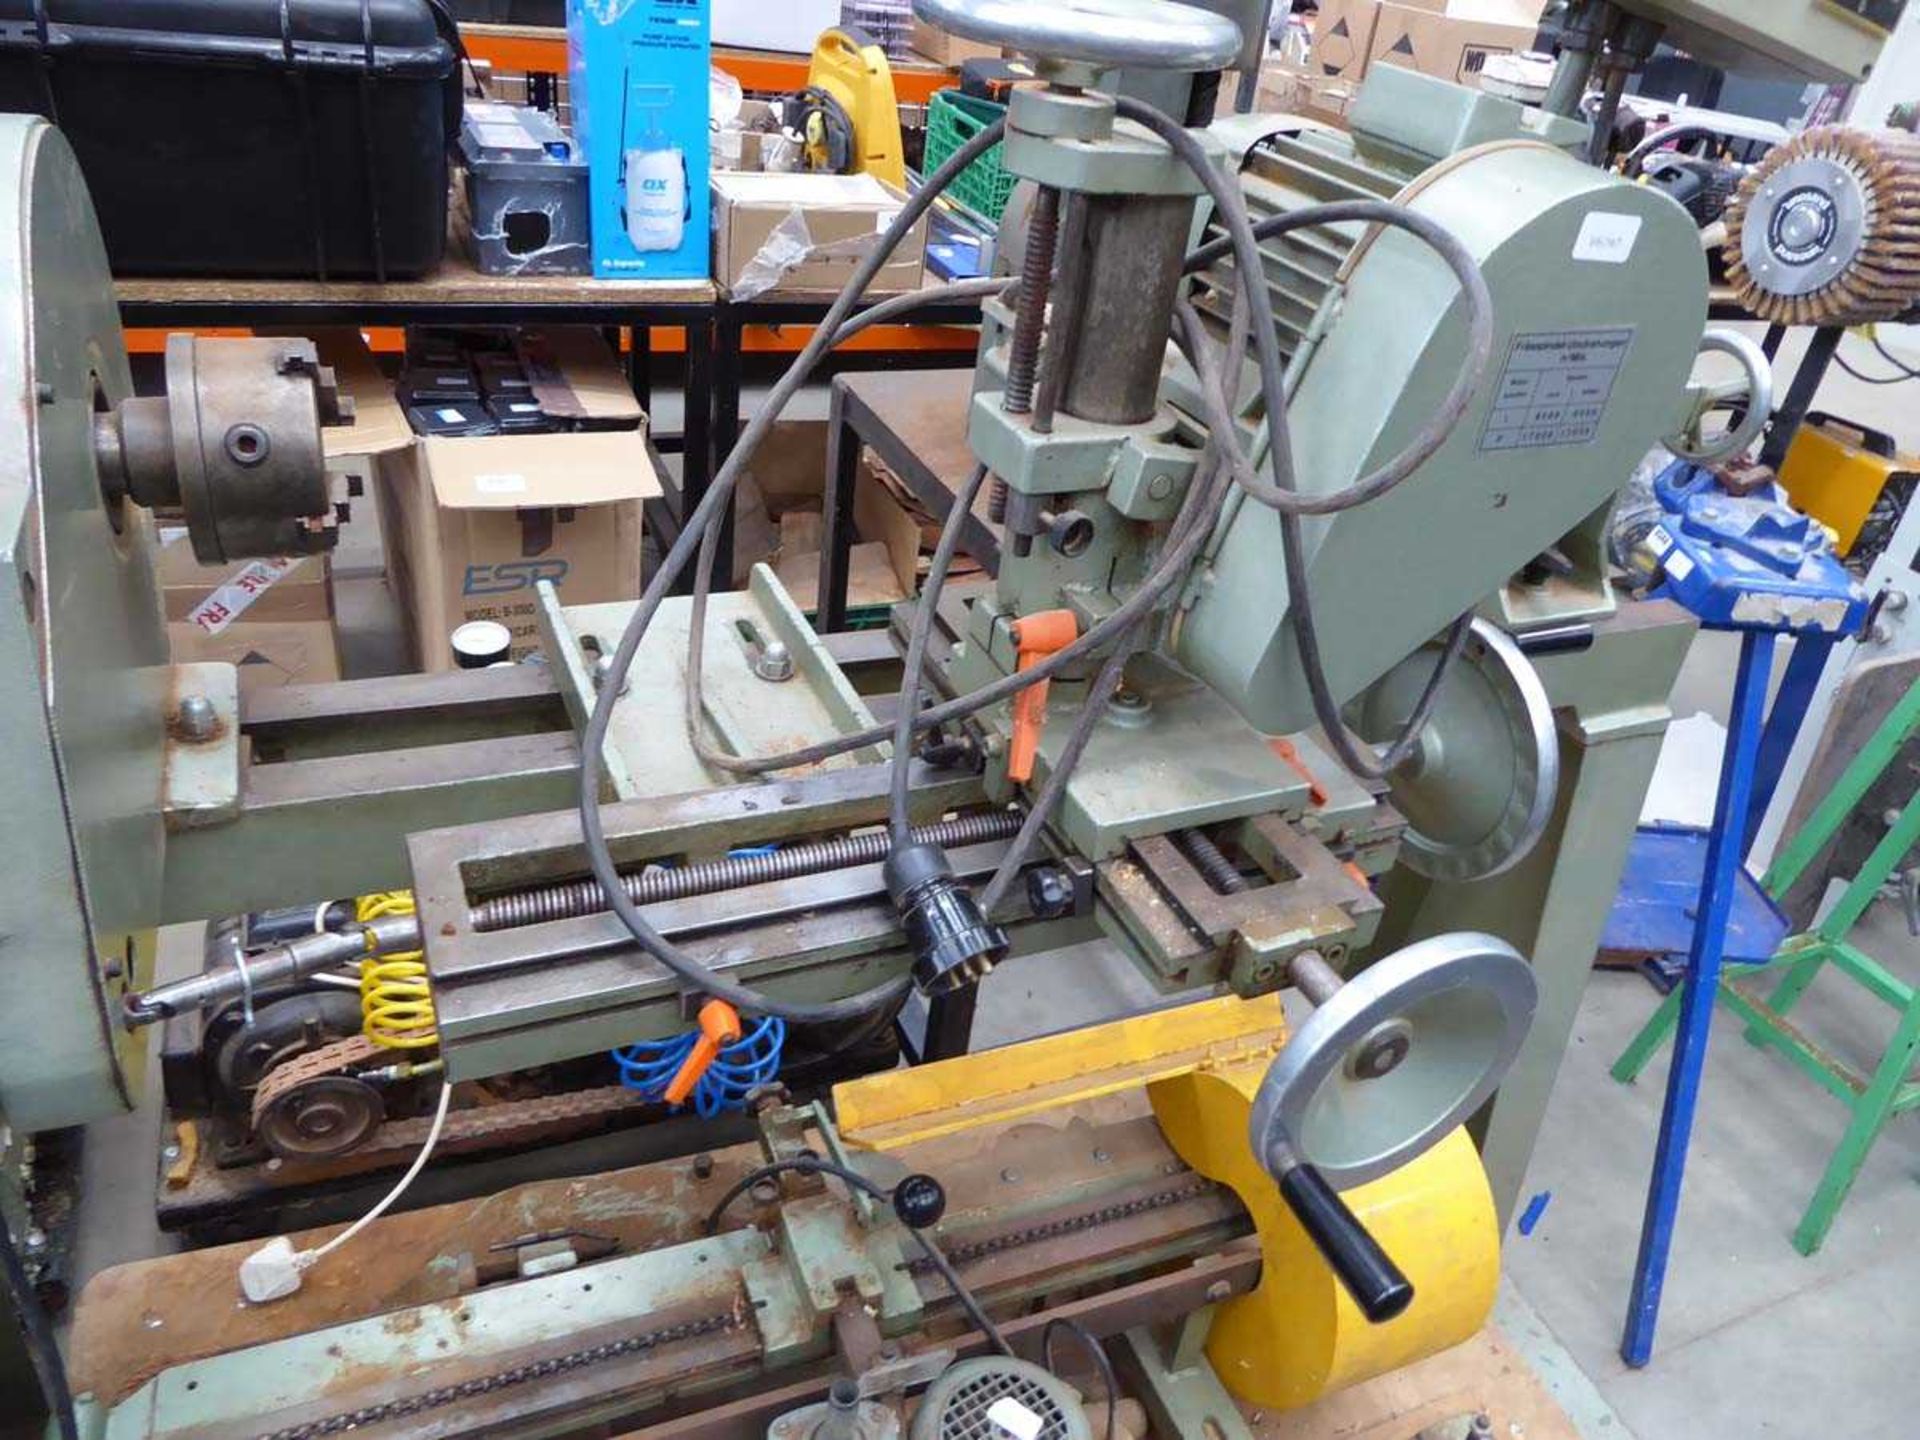 Hapco Albus woodturning copy lathe with 4ft bed and barley twist tooling, 3 phase electric - Image 2 of 5